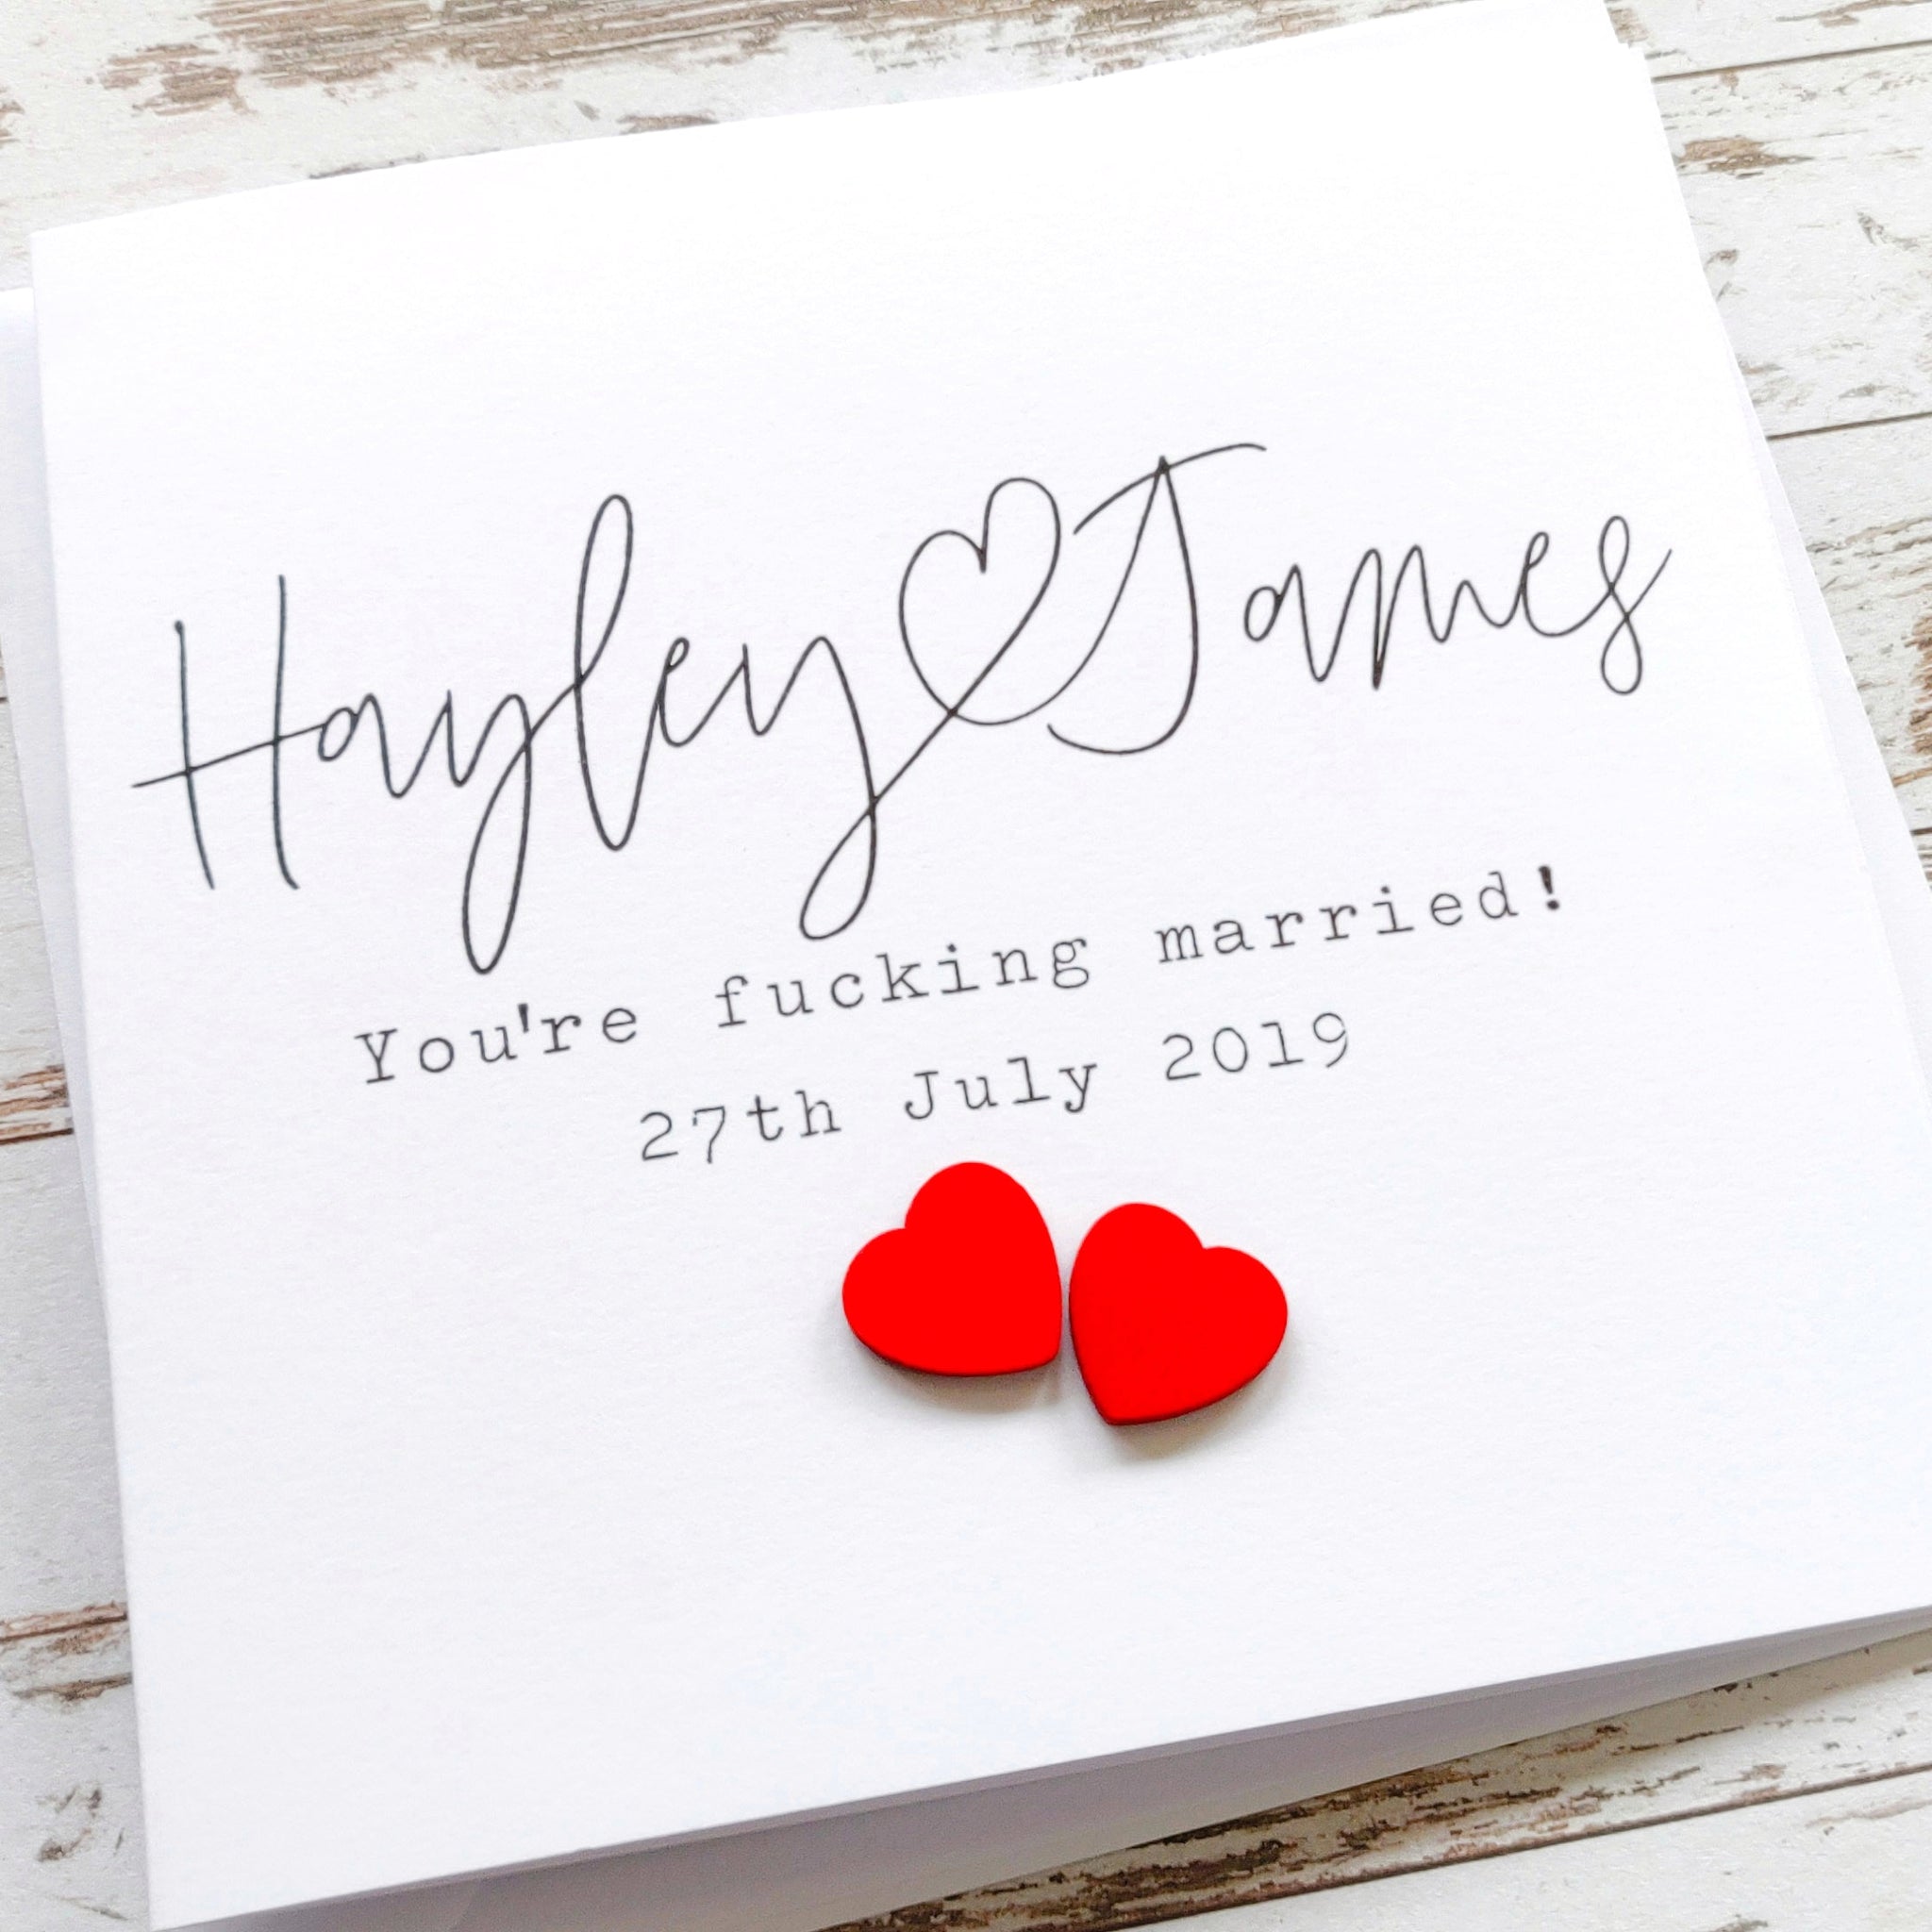 Personalised "You're fucking married!" wedding engagement card